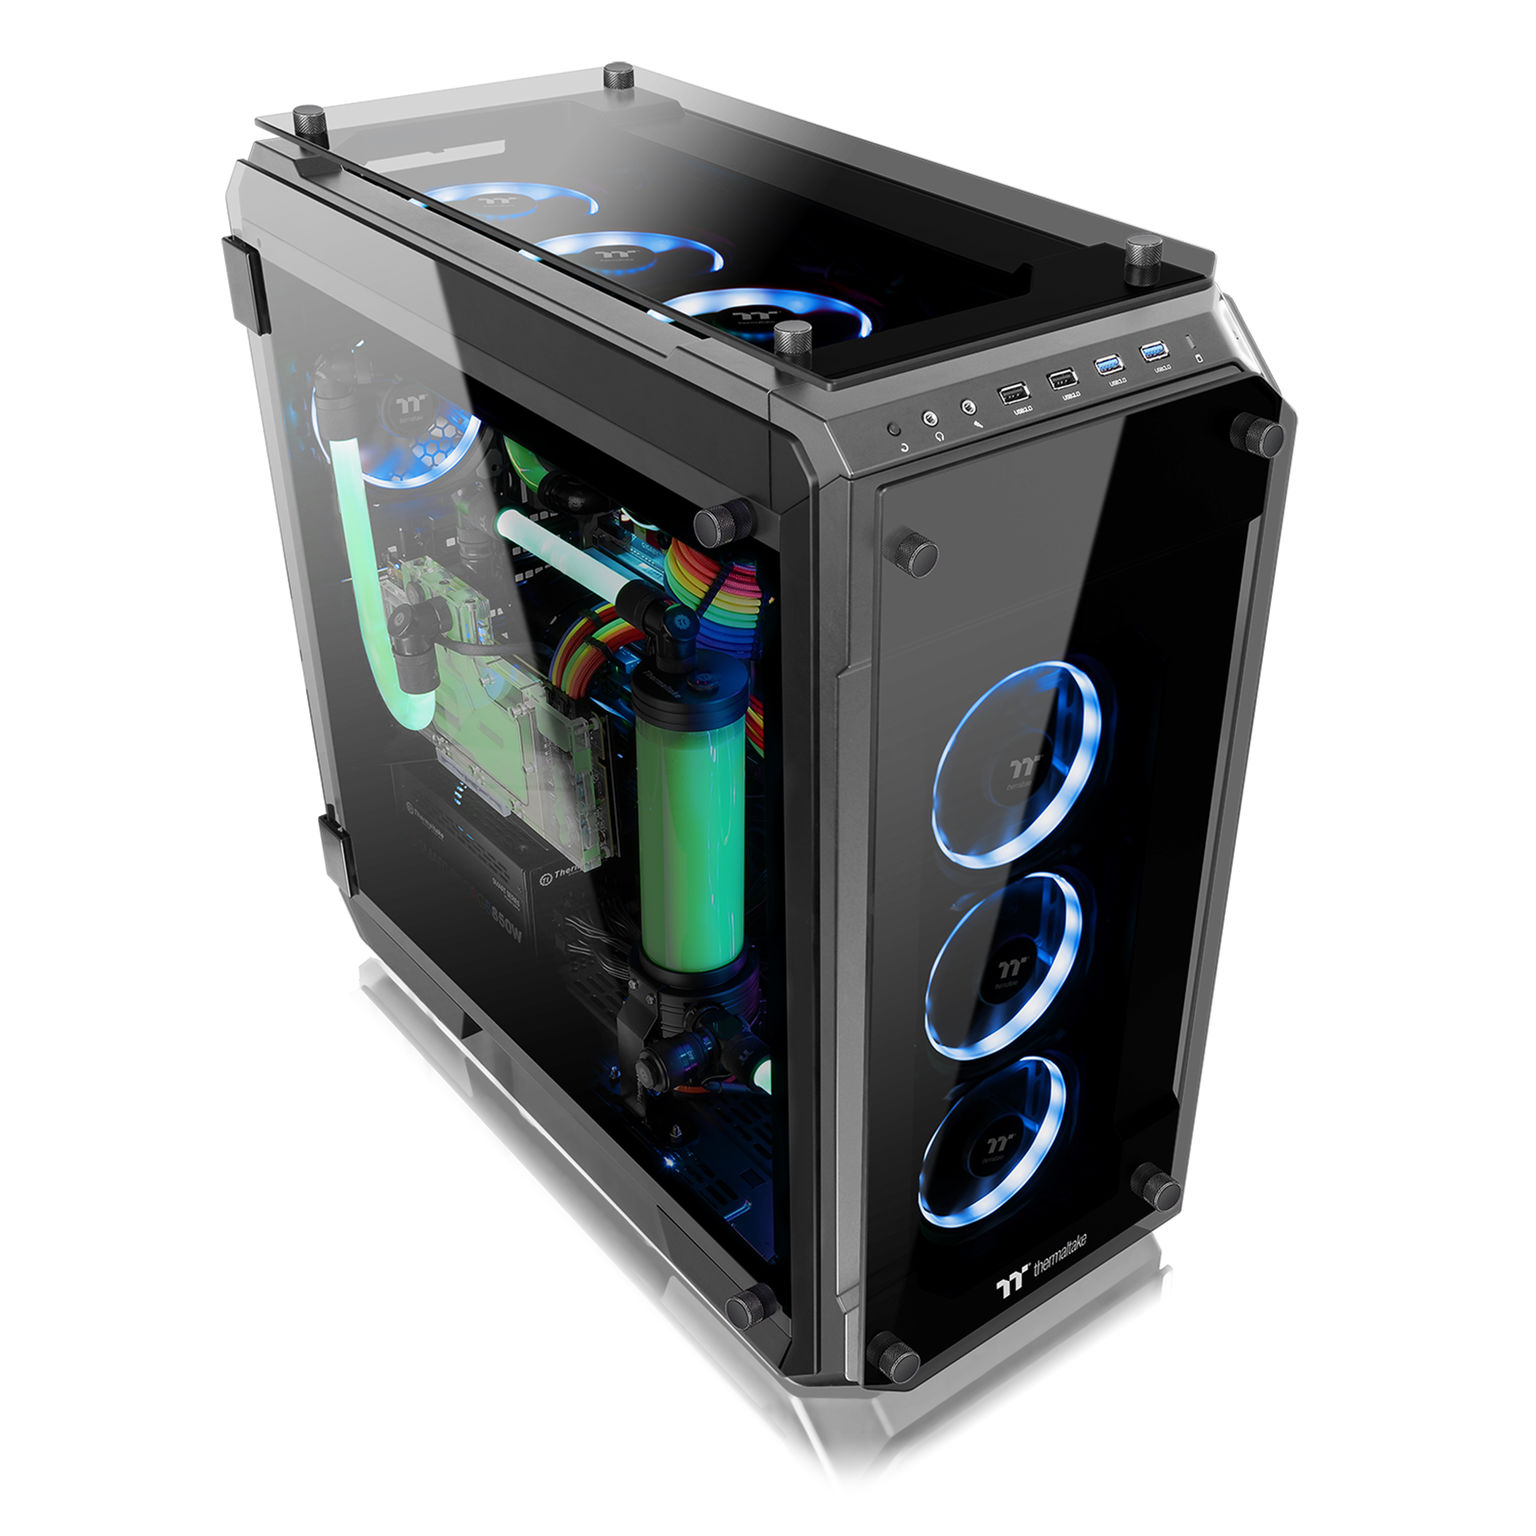 View 71 Tempered Glass RGB Edition Chassis